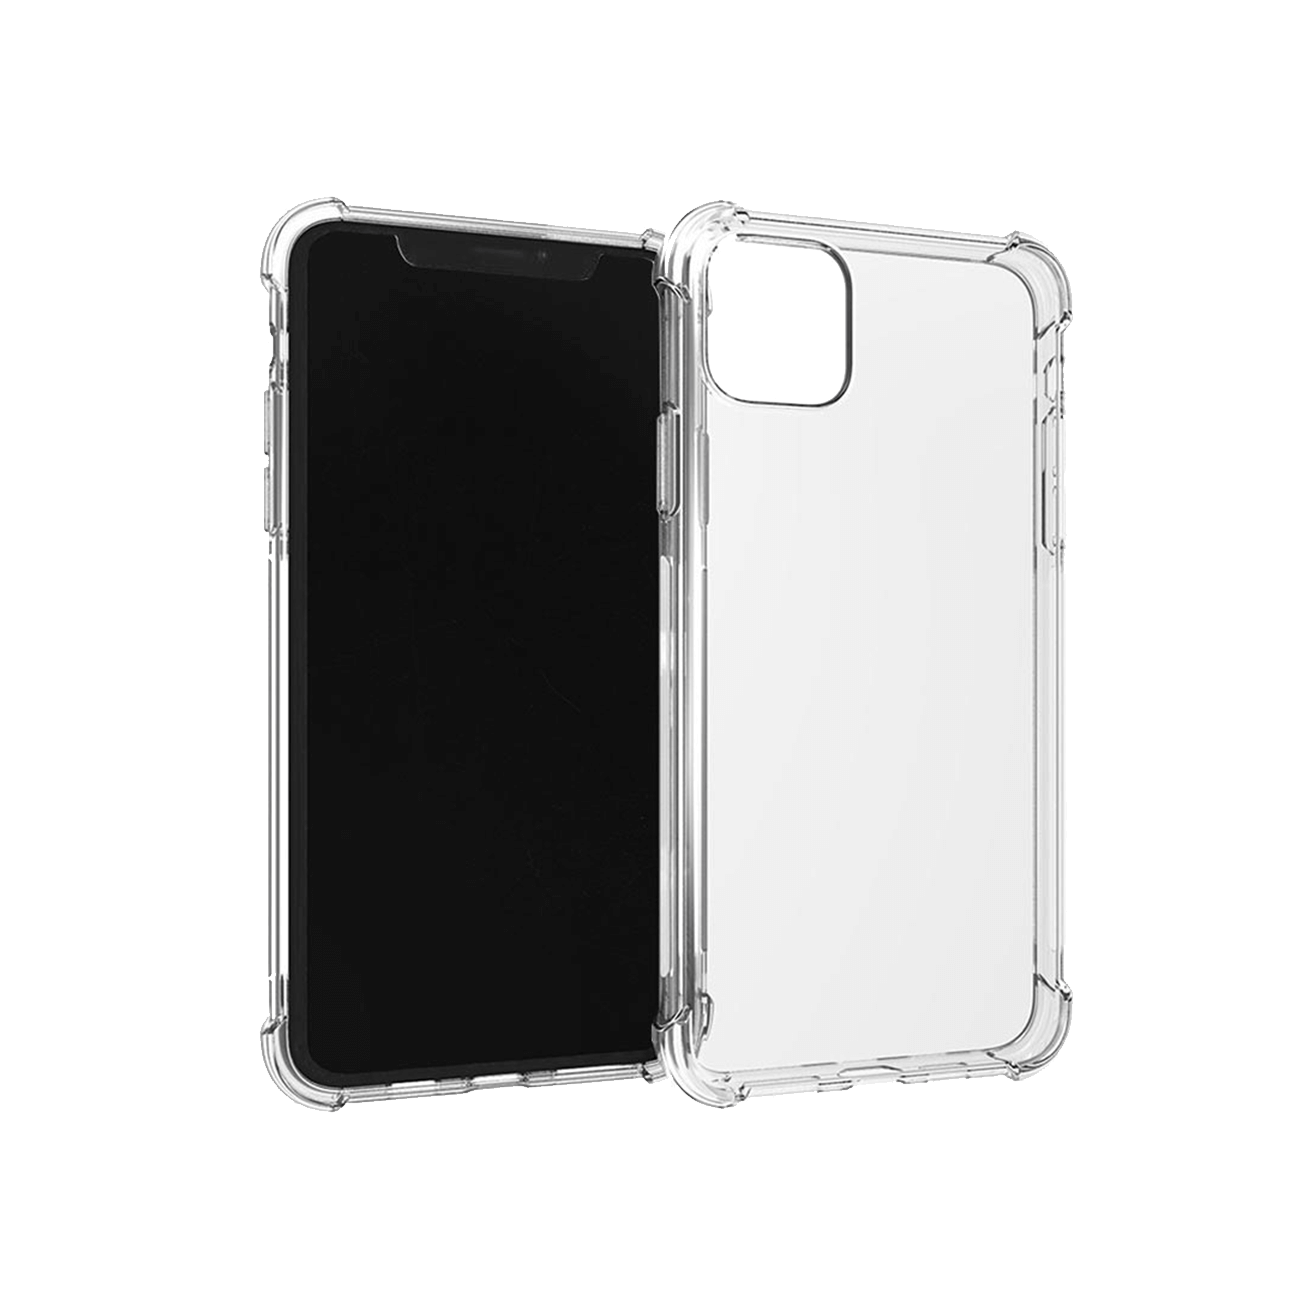 Apple iPhone 11 Pro Transparent Back Cover